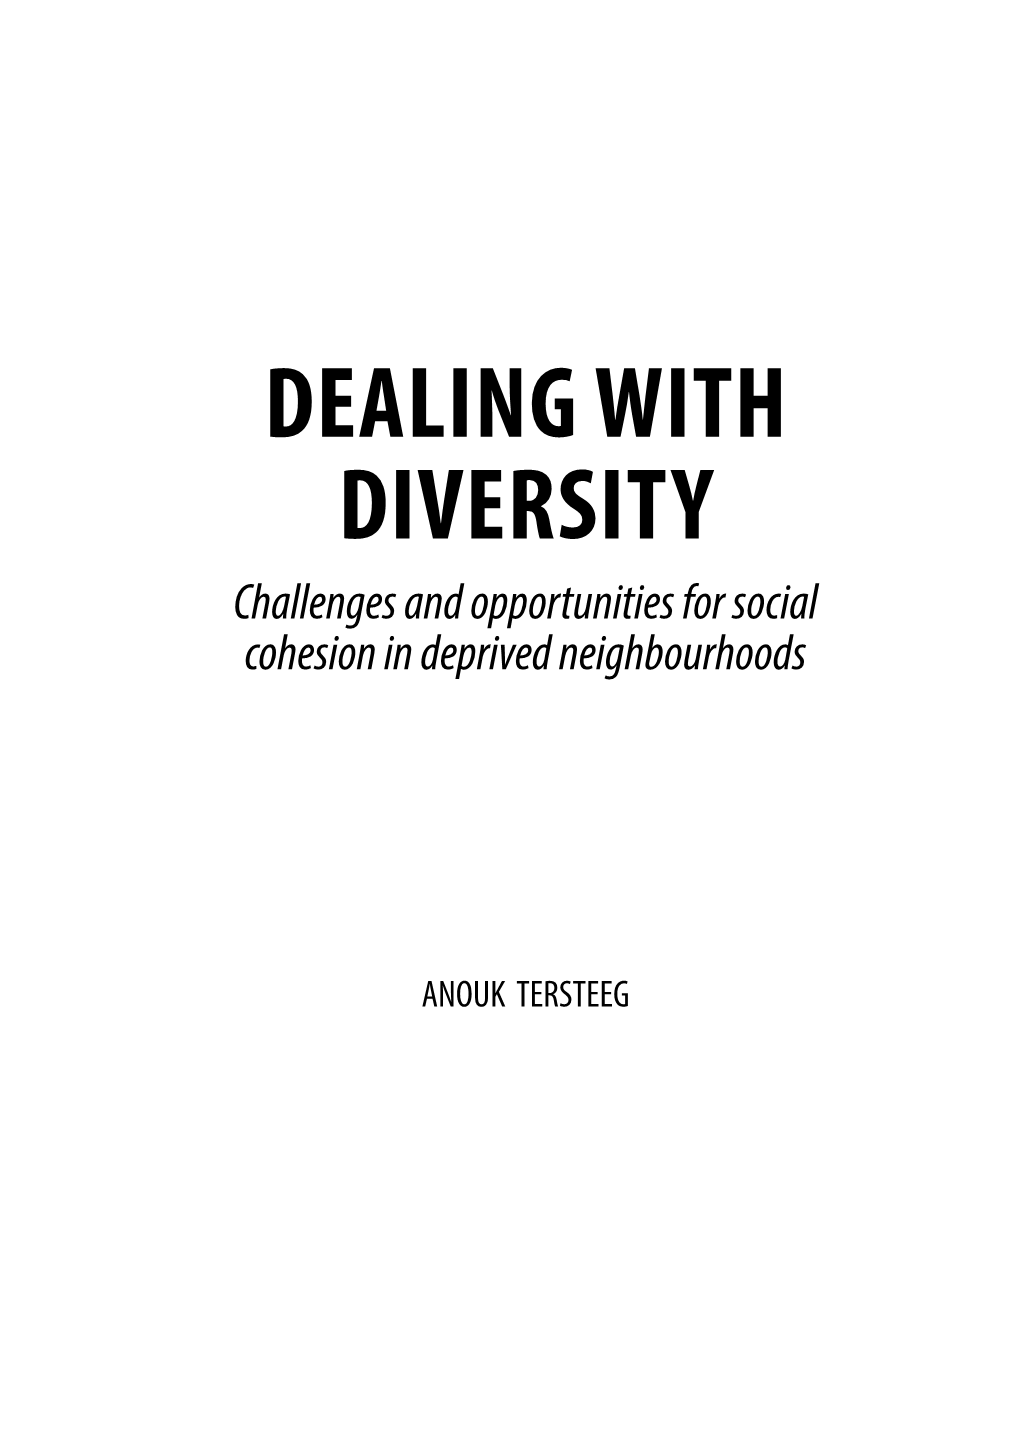 DEALING with DIVERSITY Challenges and Opportunities for Social Cohesion in Deprived Neighbourhoods